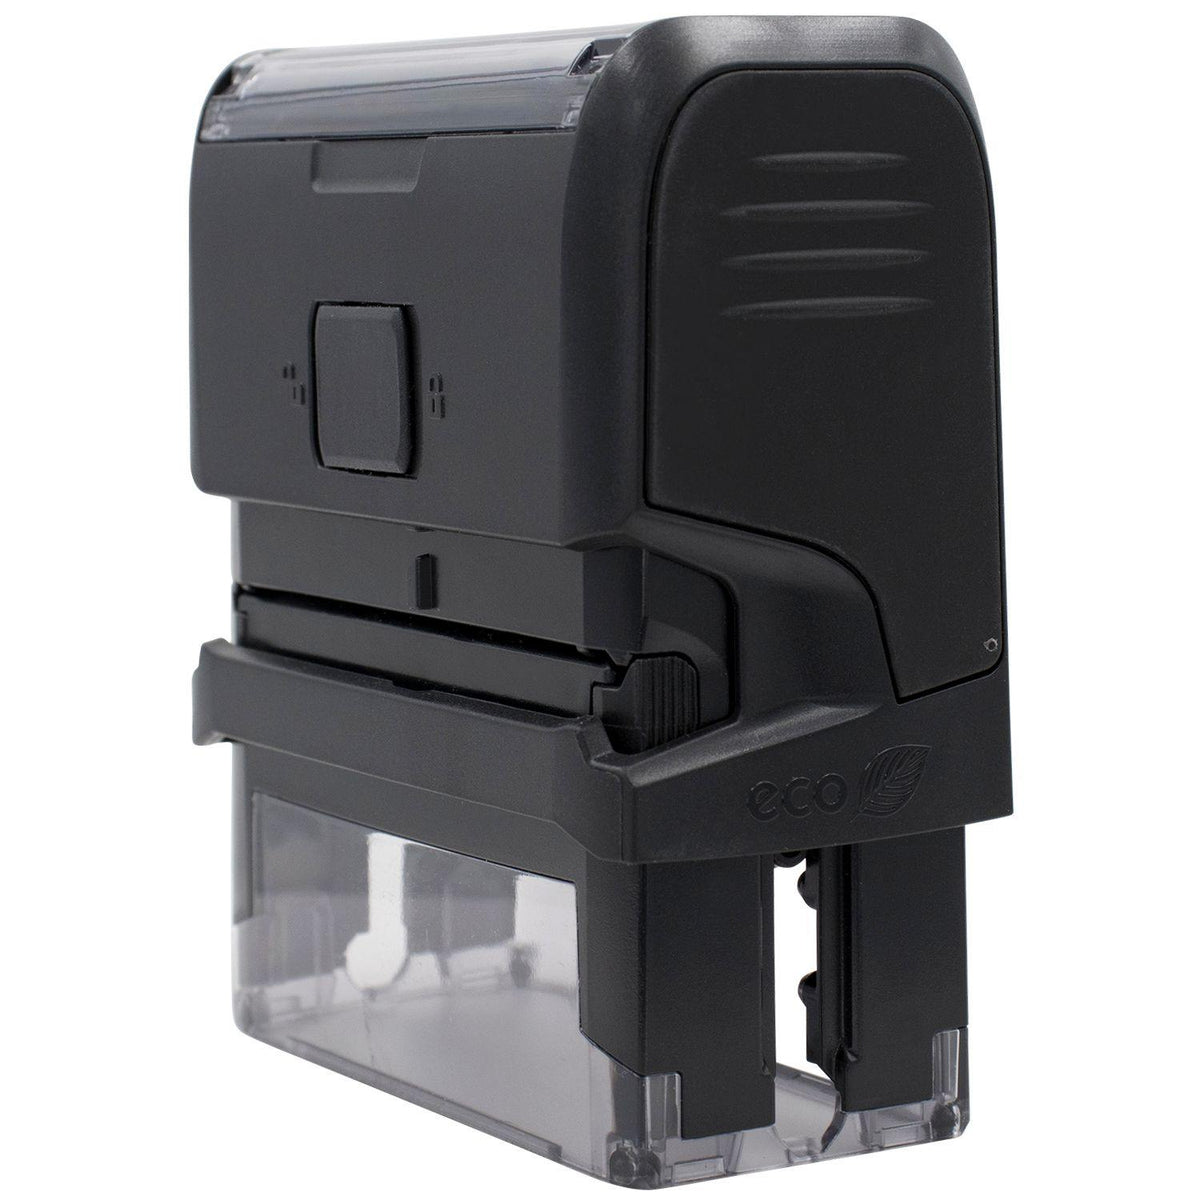 Large Self Inking Summer Term Recommended Stamp - Engineer Seal Stamps - Brand_Trodat, Impression Size_Large, Stamp Type_Self-Inking Stamp, Type of Use_Teacher